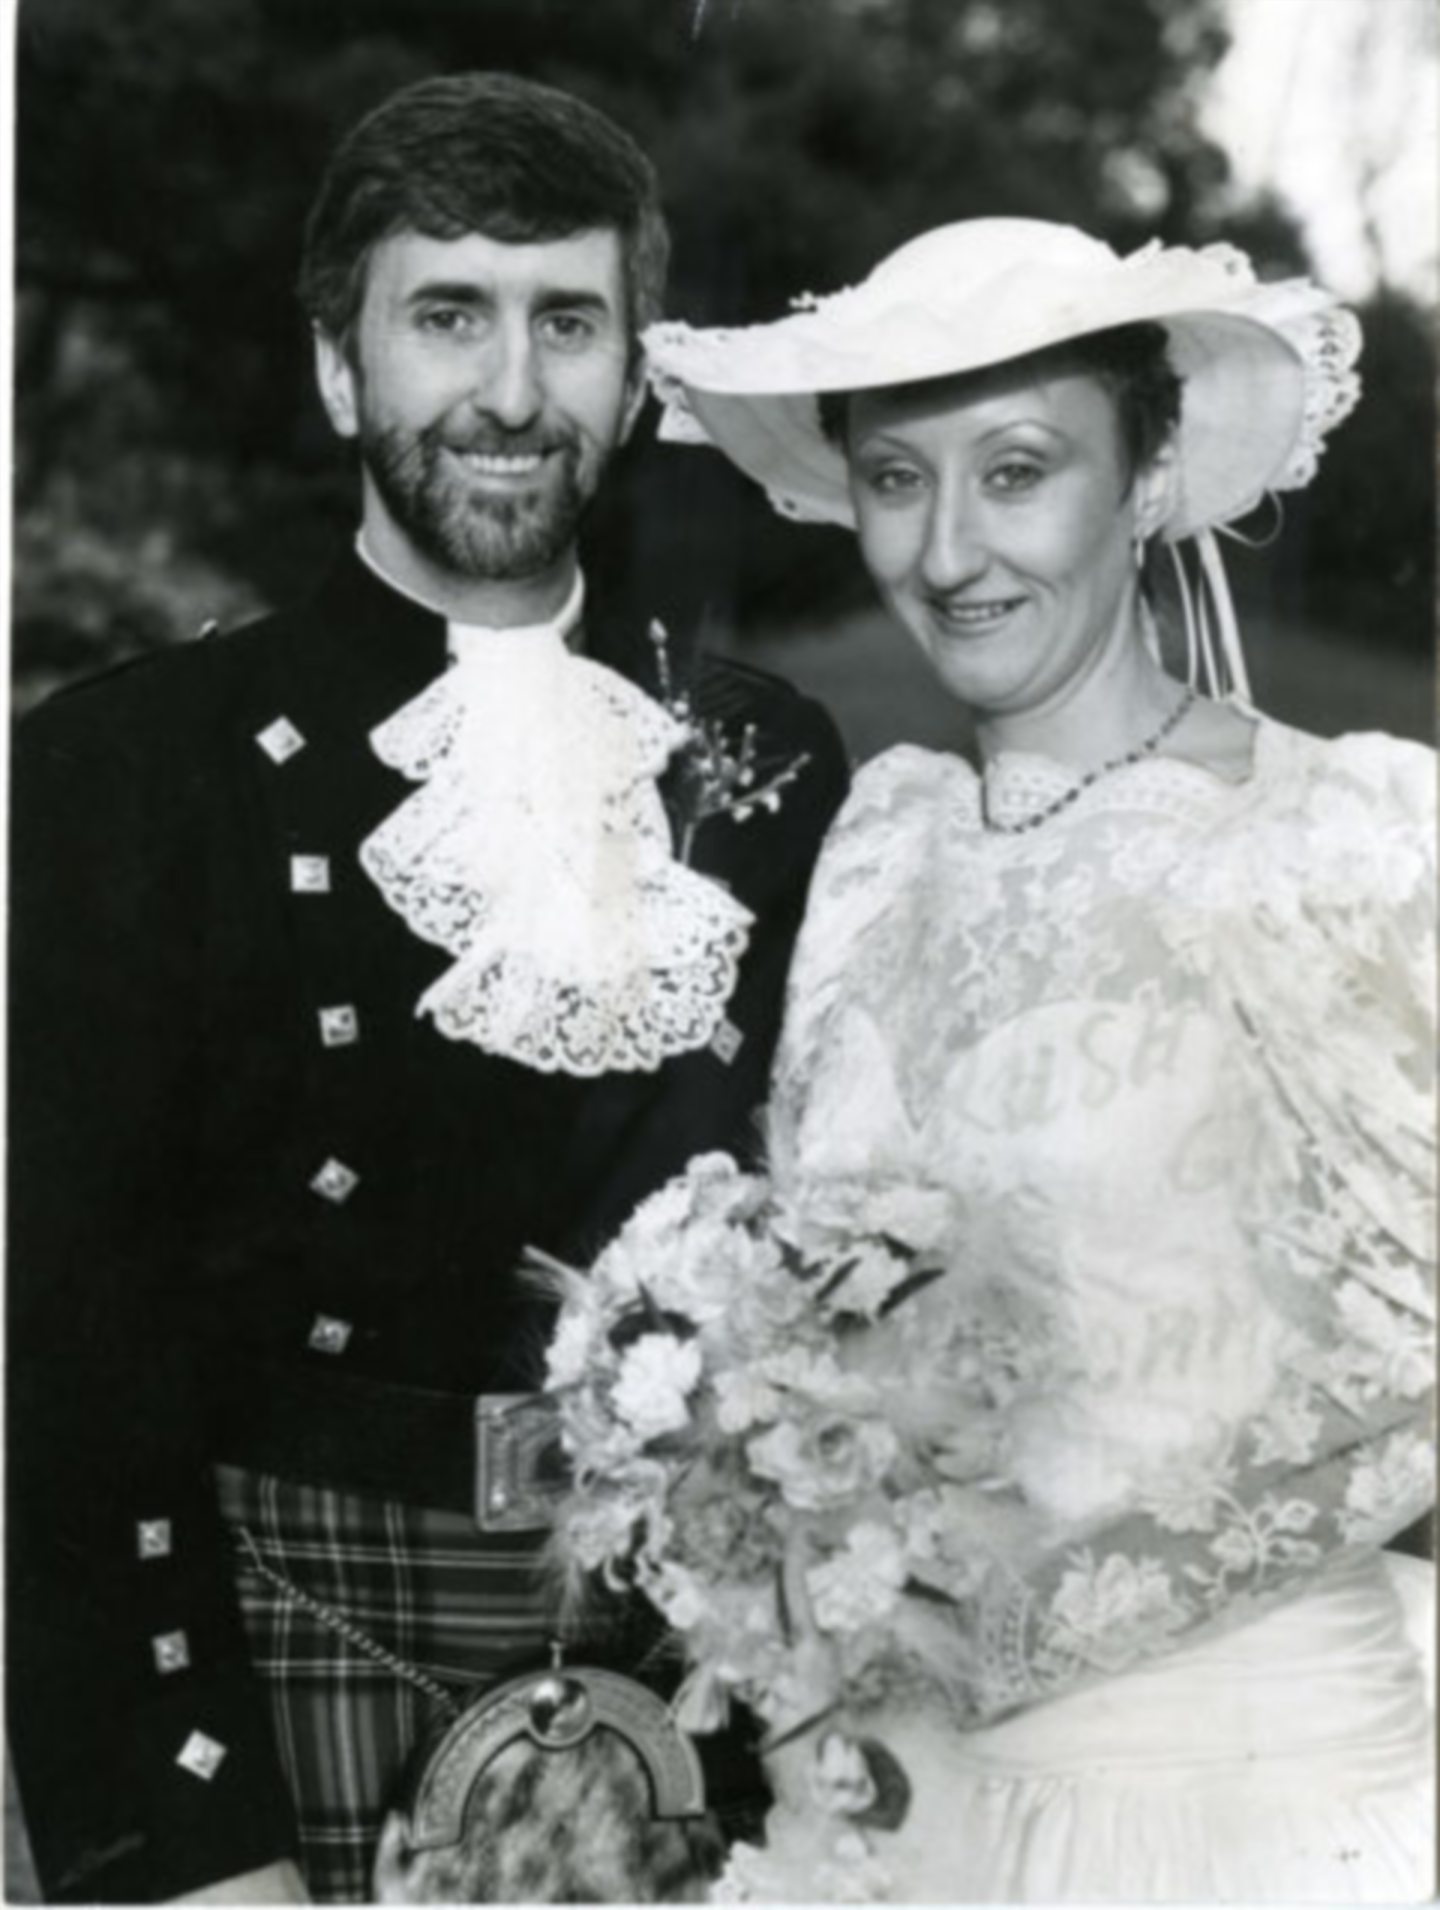 Andrew and Lynda Hunter on their wedding day, before tragedy struck in 1987. Image: DC Thomson.